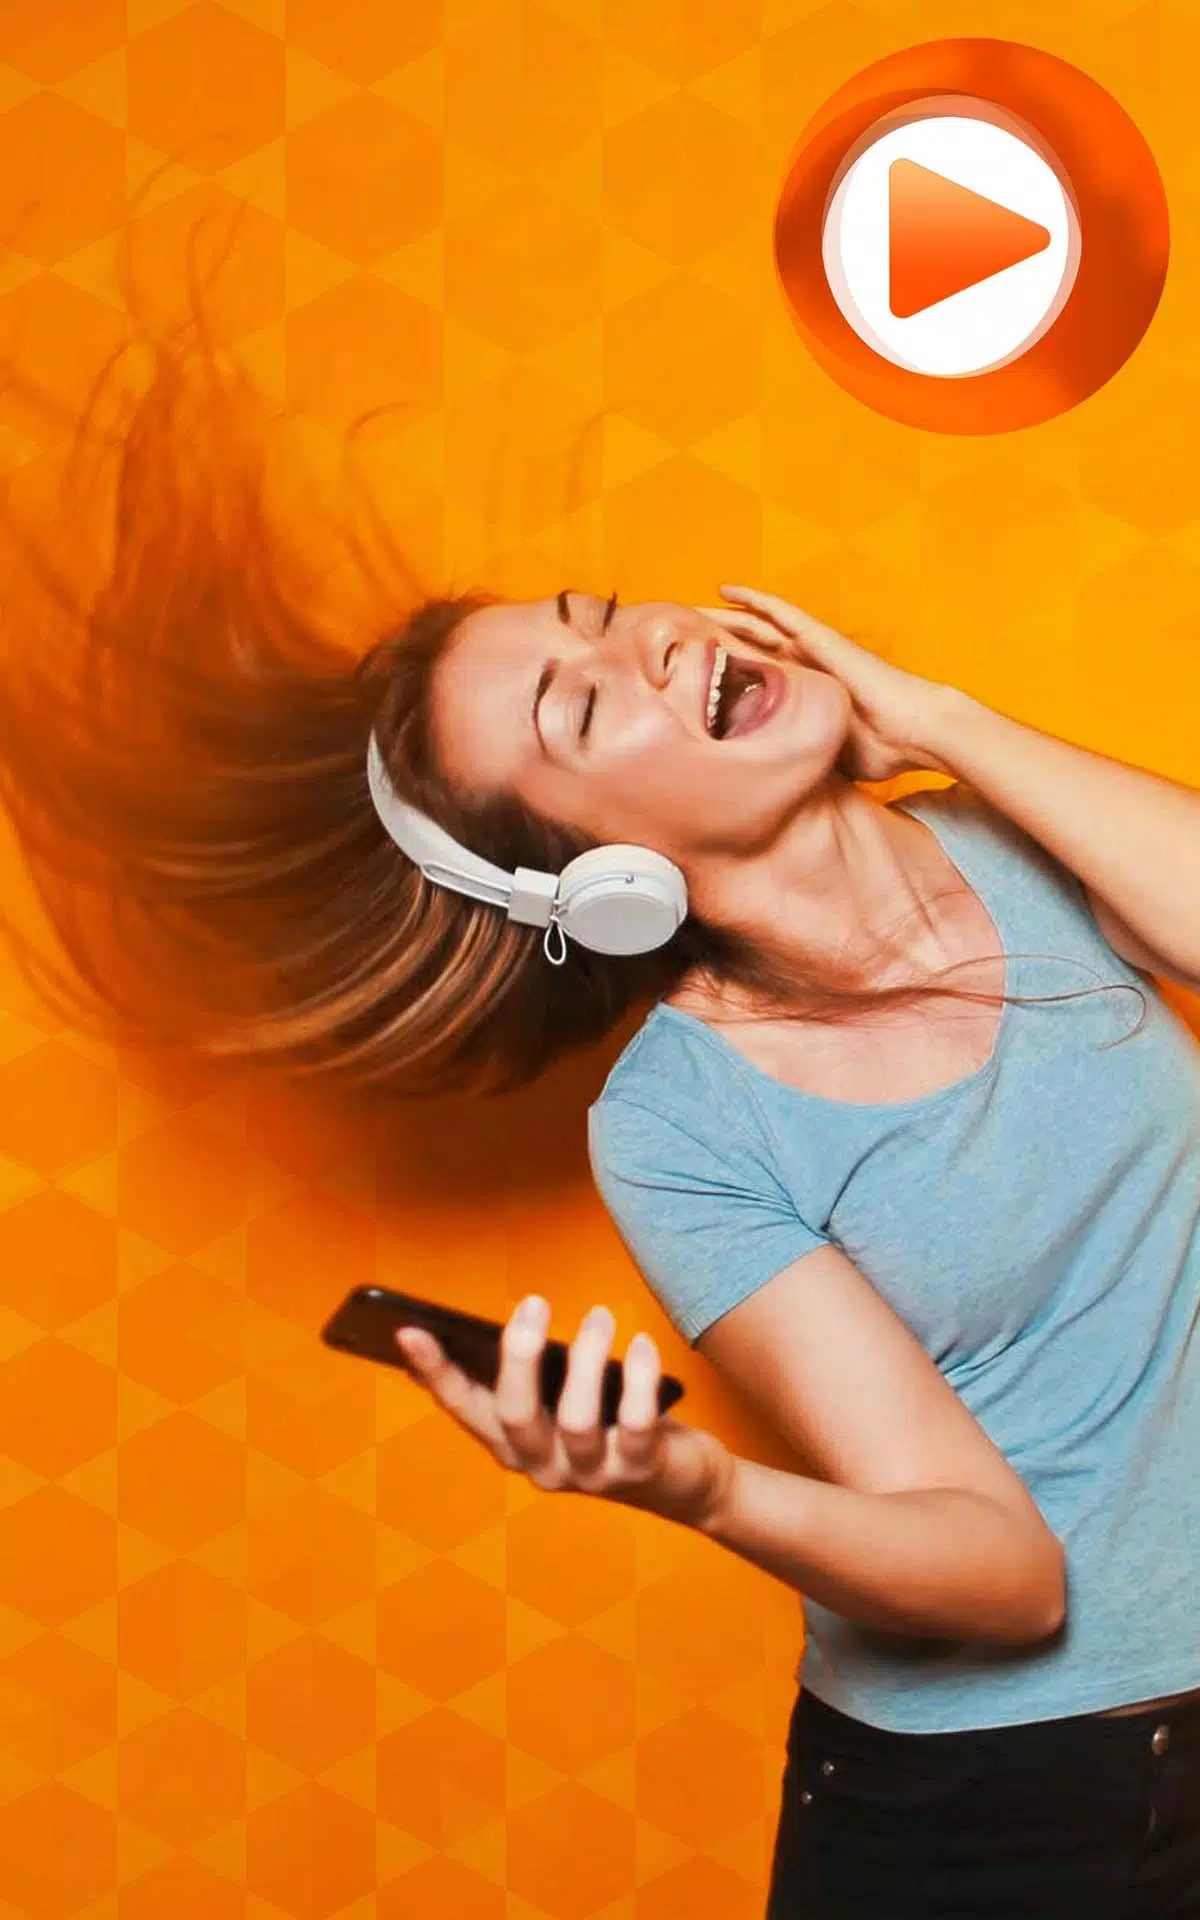 AUP MP3 Music browser APK for Android Download